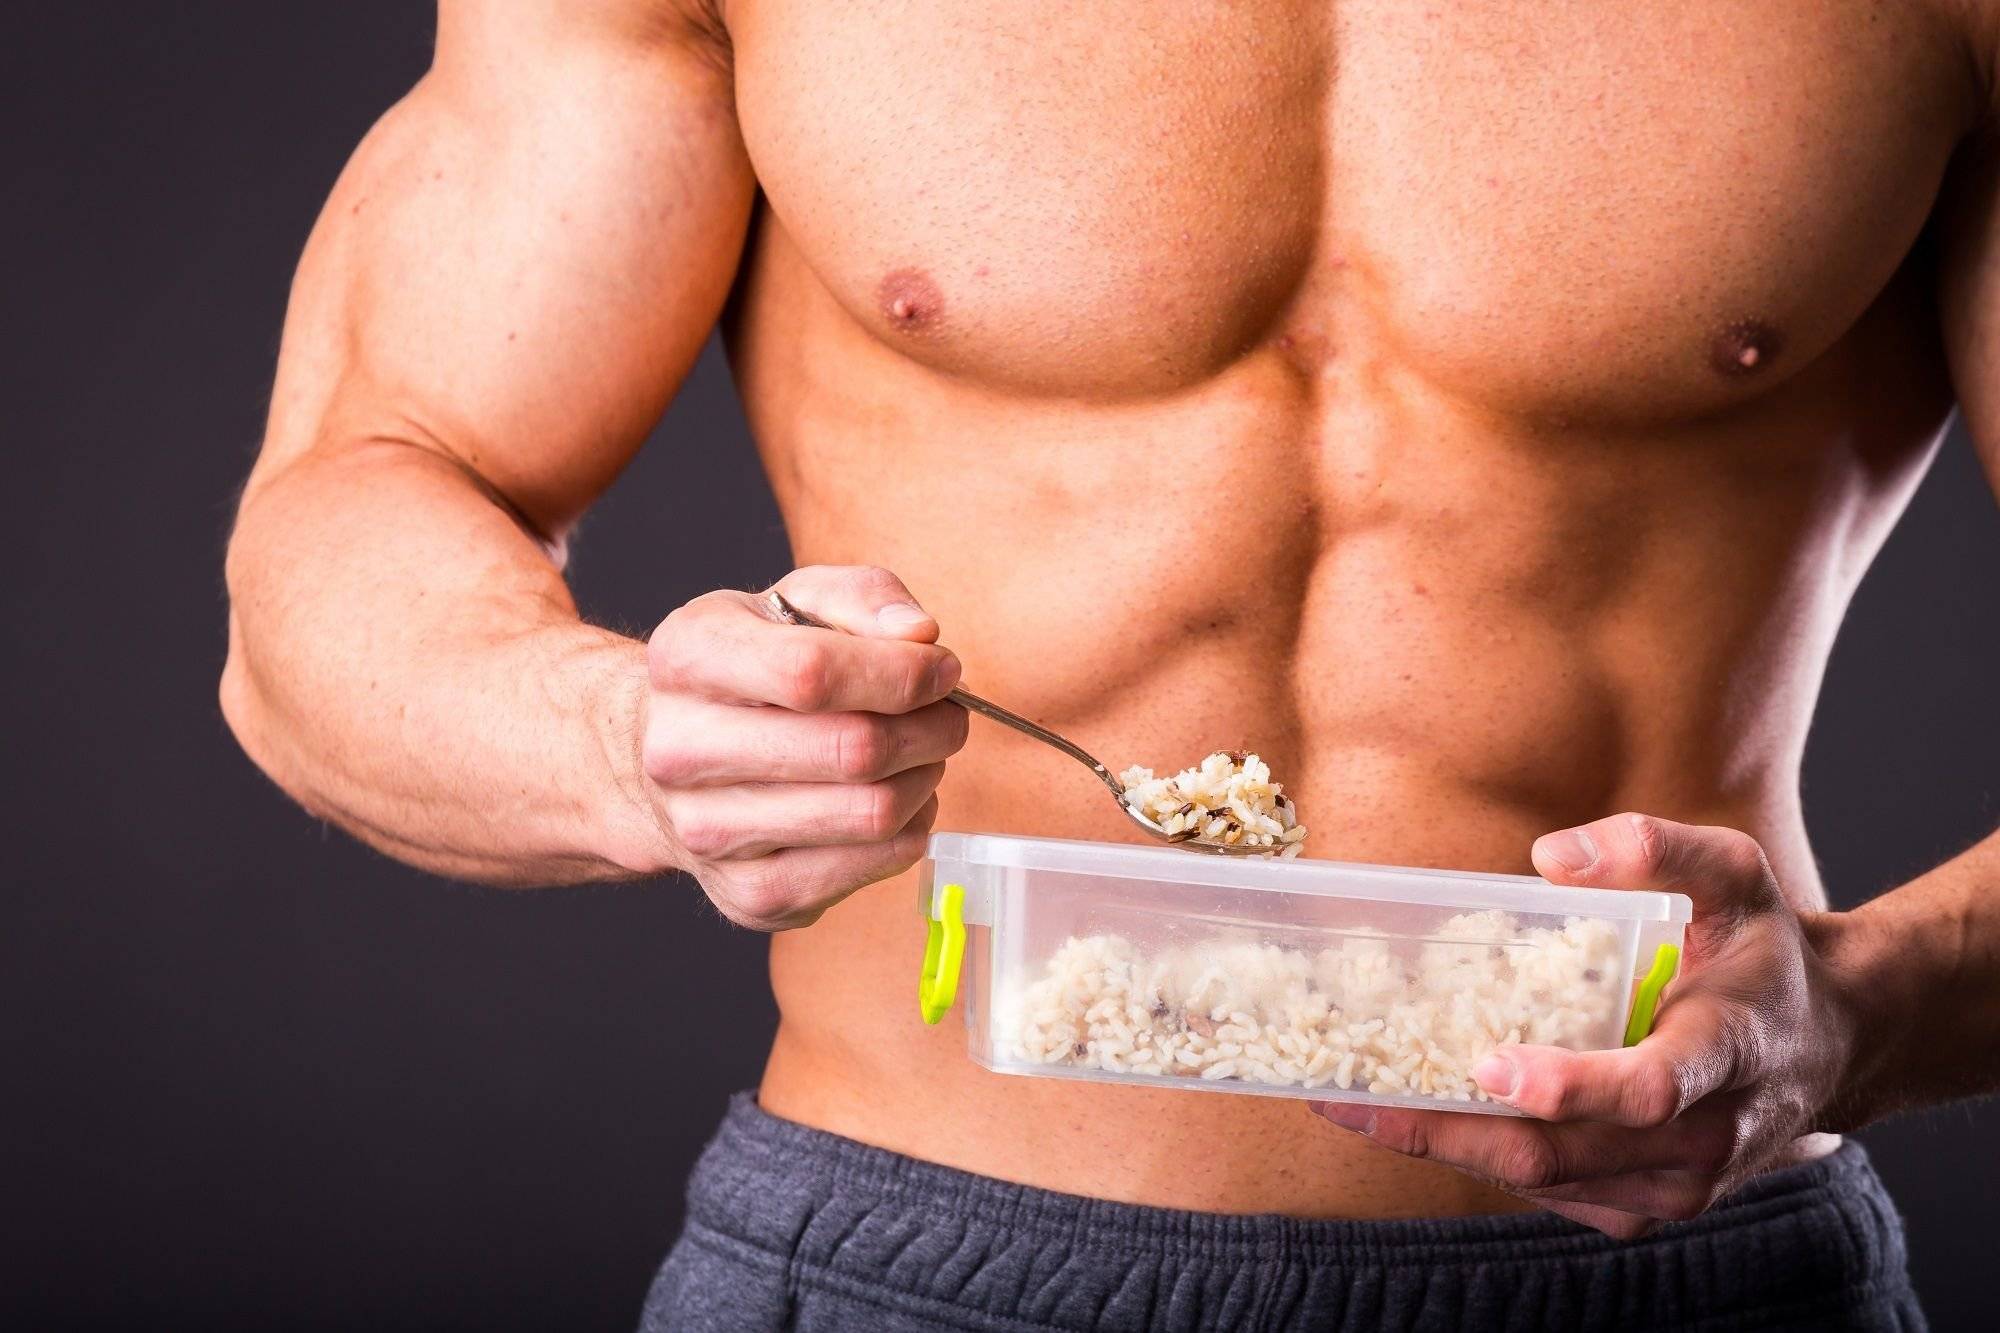 It would help if you ate carbohydrates before and after working out